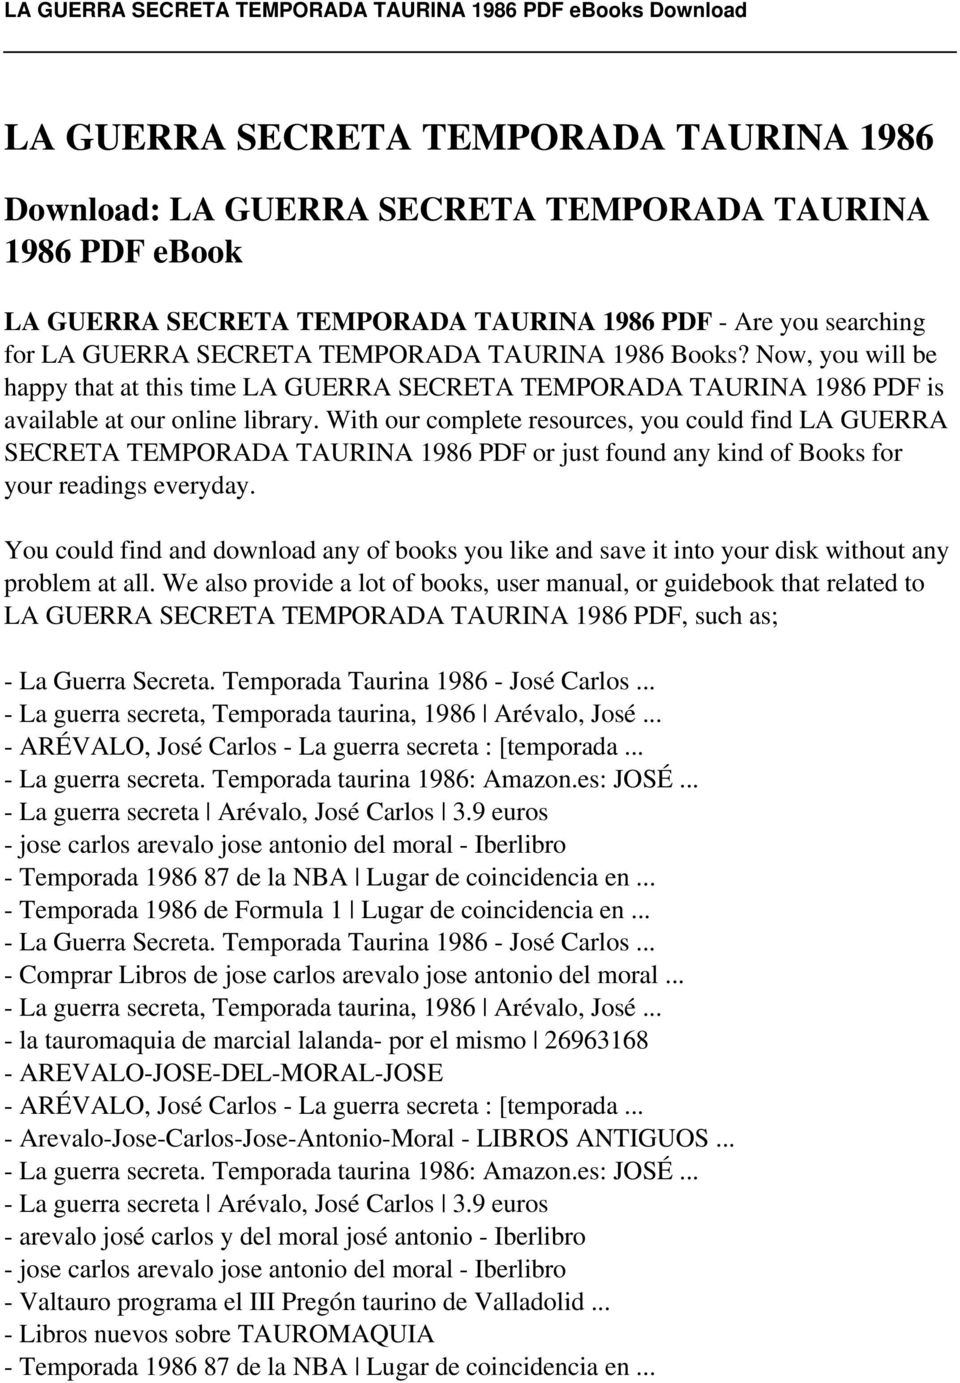 With our complete resources, you could find LA GUERRA SECRETA TEMPORADA TAURINA 1986 PDF or just found any kind of Books for your readings everyday.